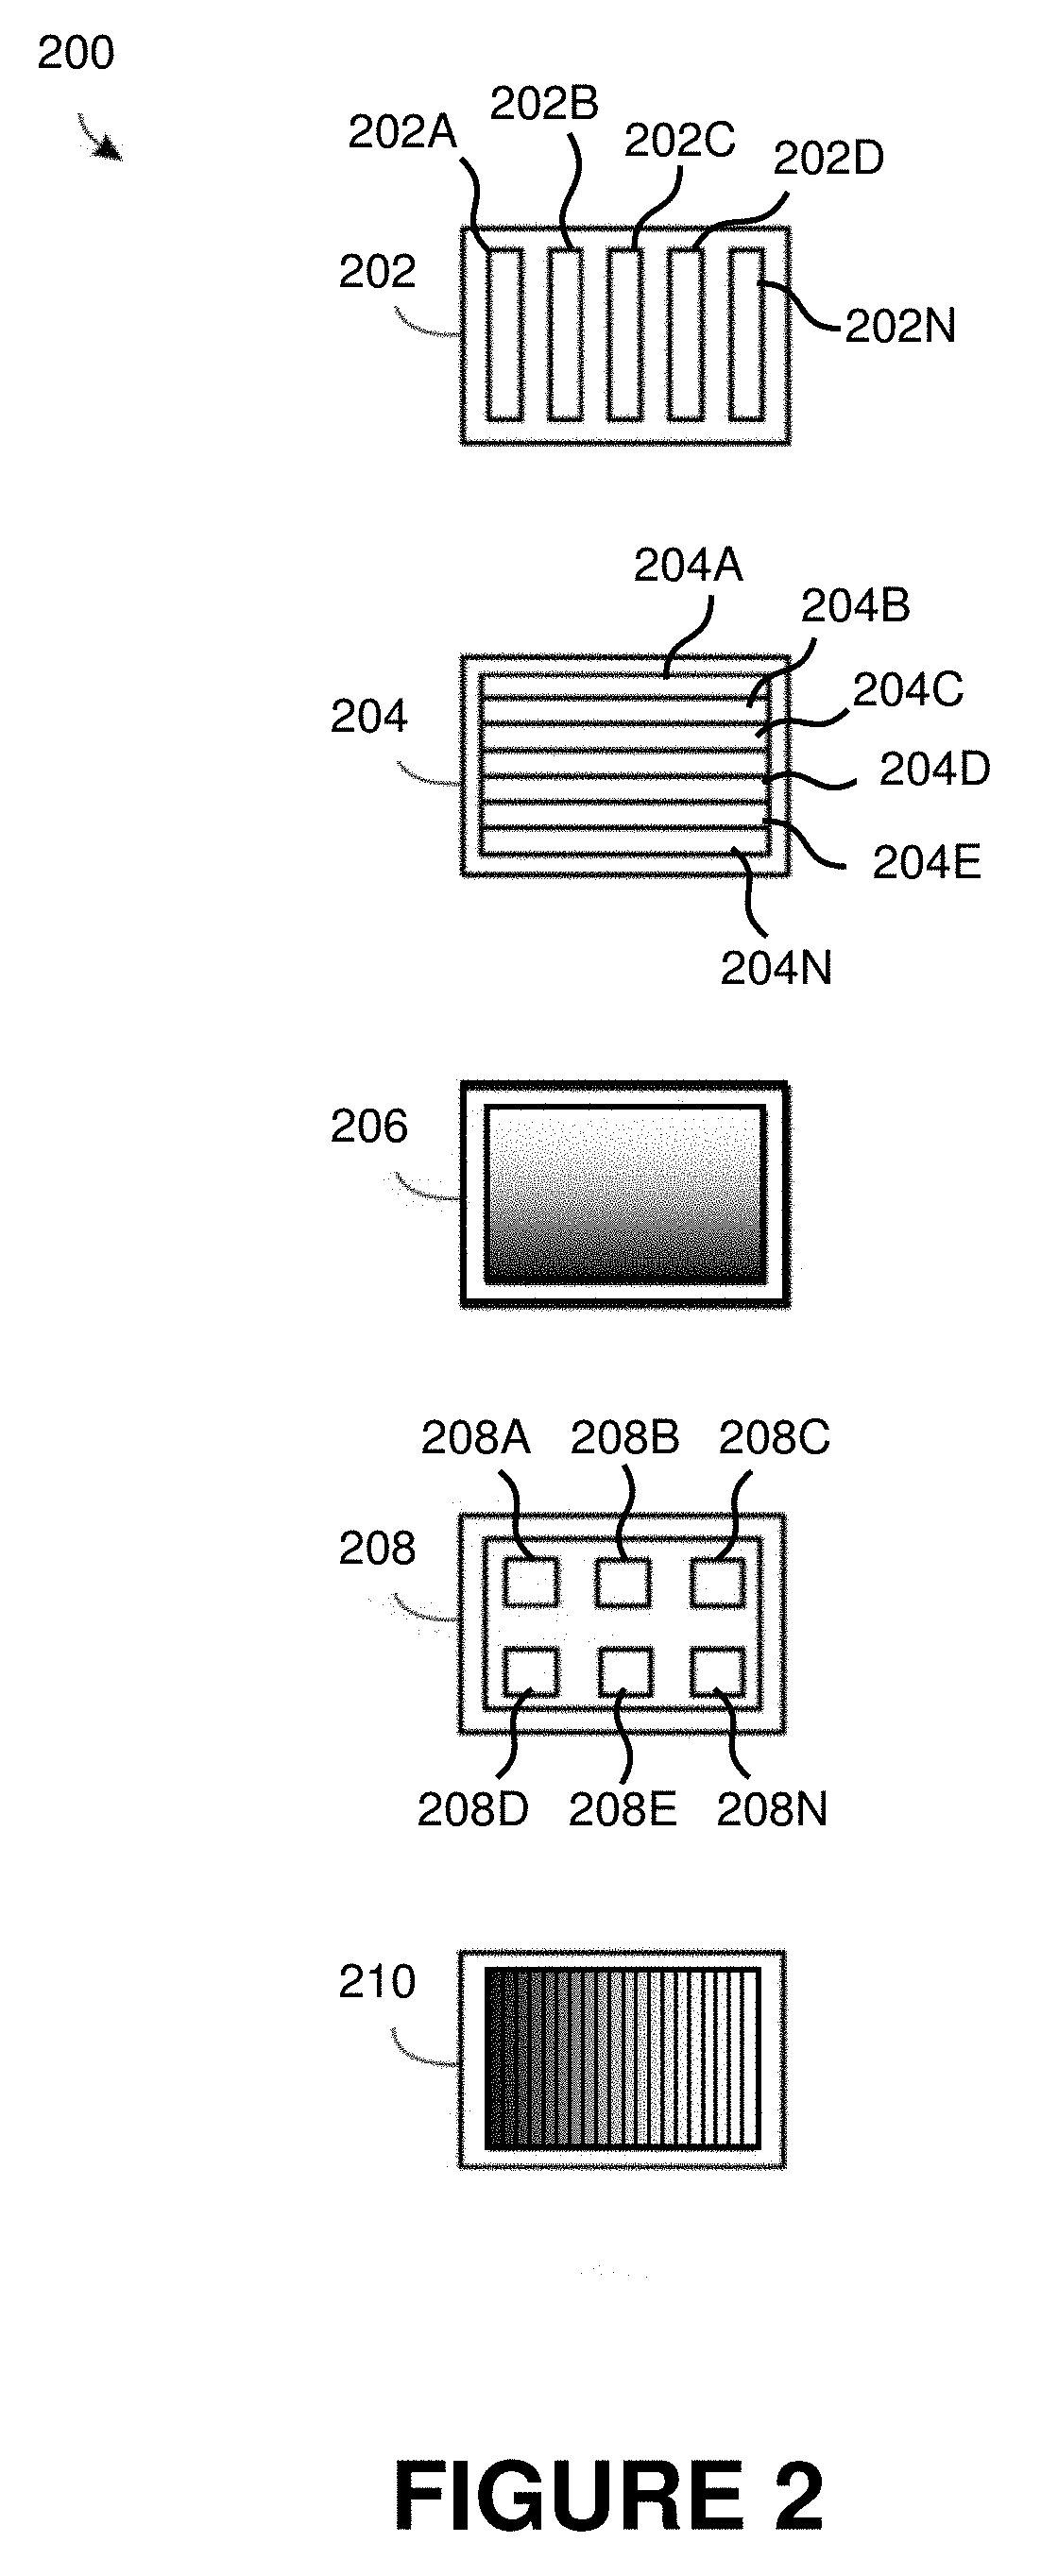 Reagent test strips comprising reference regions for measurement with colorimetric test platform